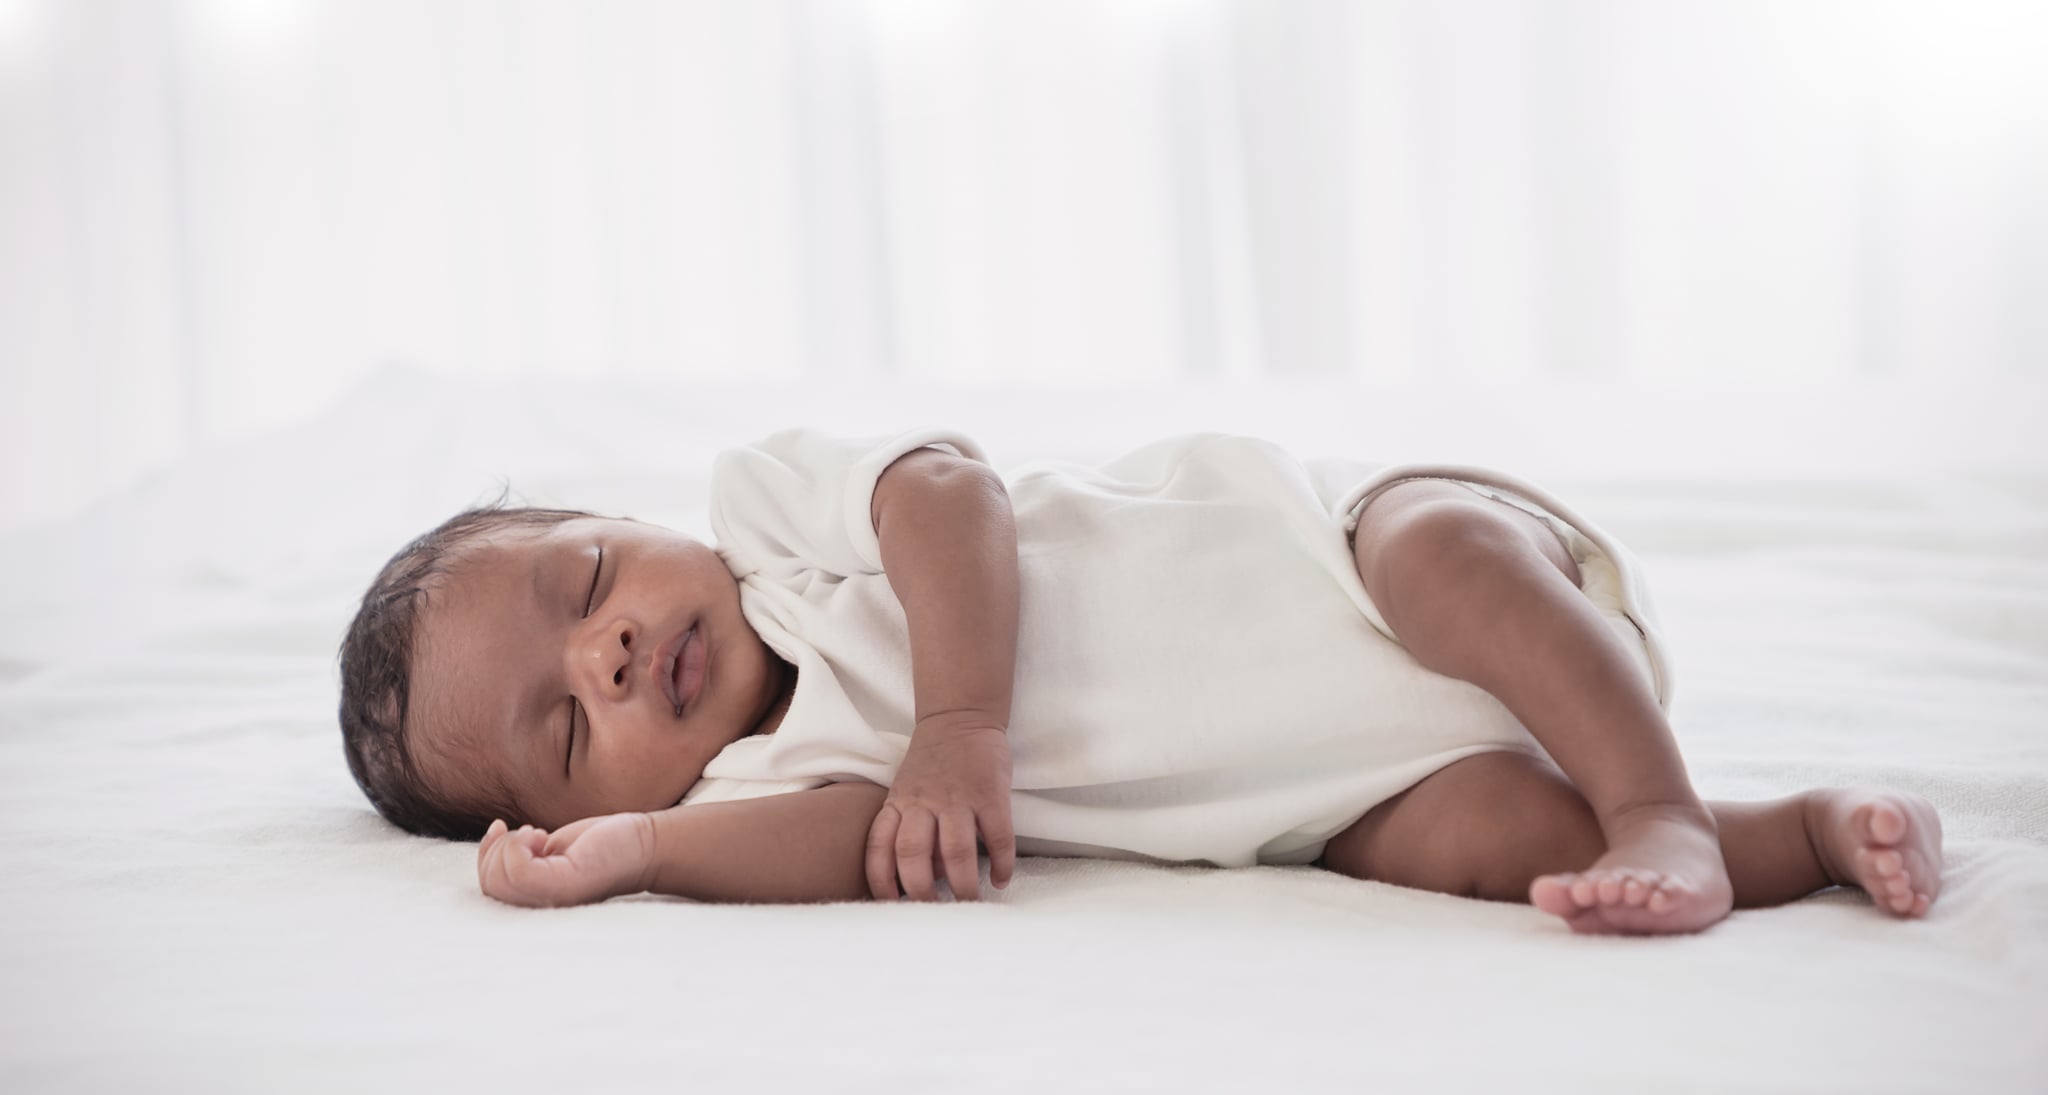 Portrait of African American  newborn baby body sleeping in bed. Closeup new born baby. Love family healthcare and medical body part nursery together happy motherâs day concept